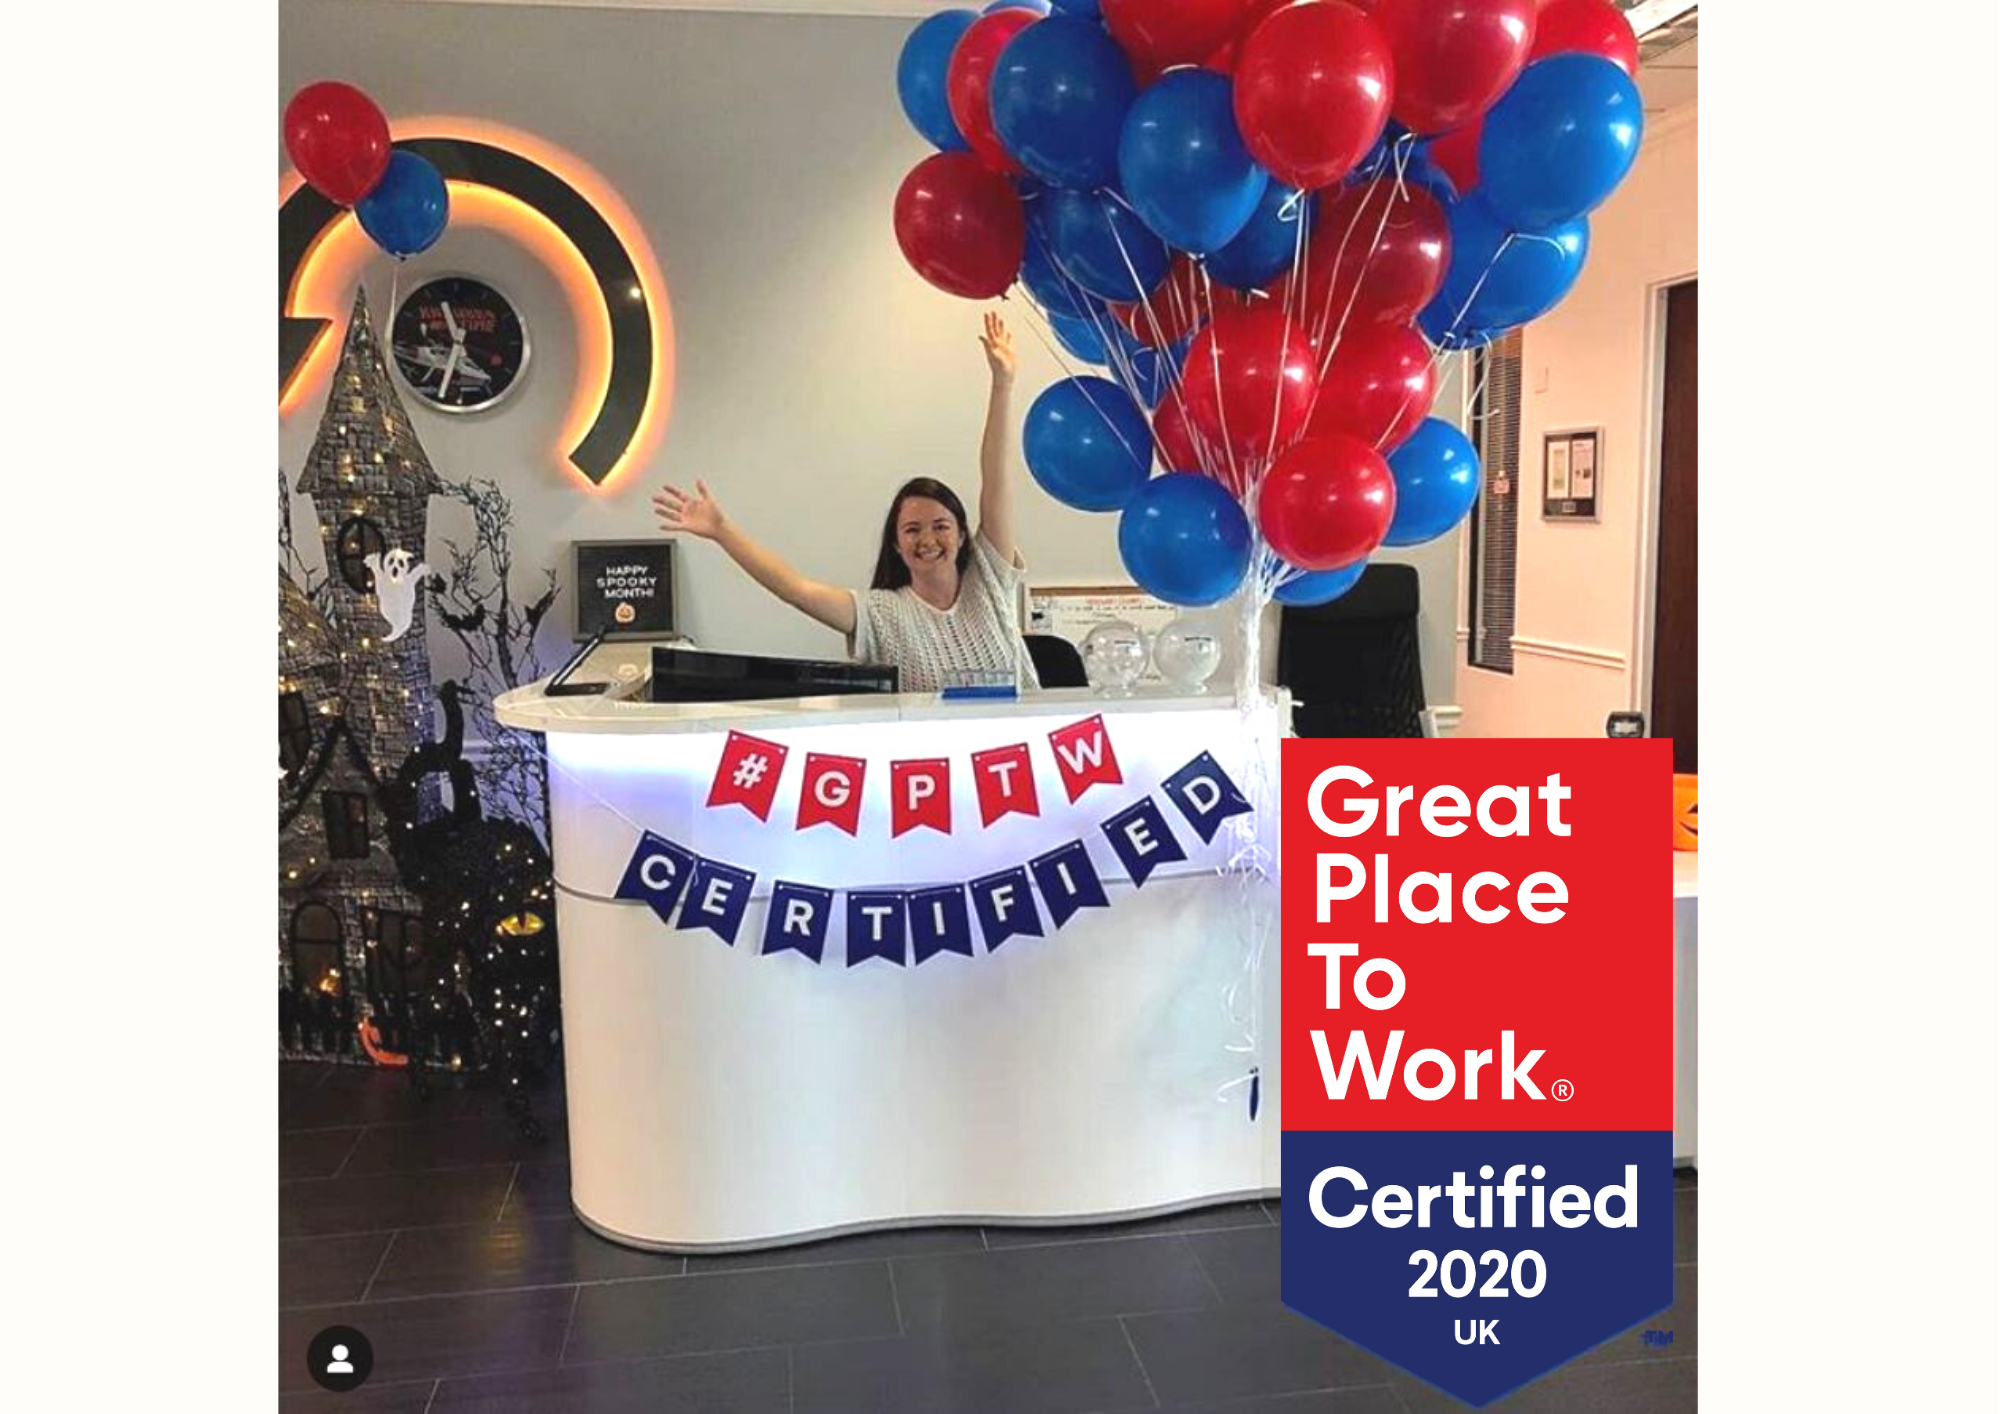 12 Benefits of Getting Great Place to Work-Certified™